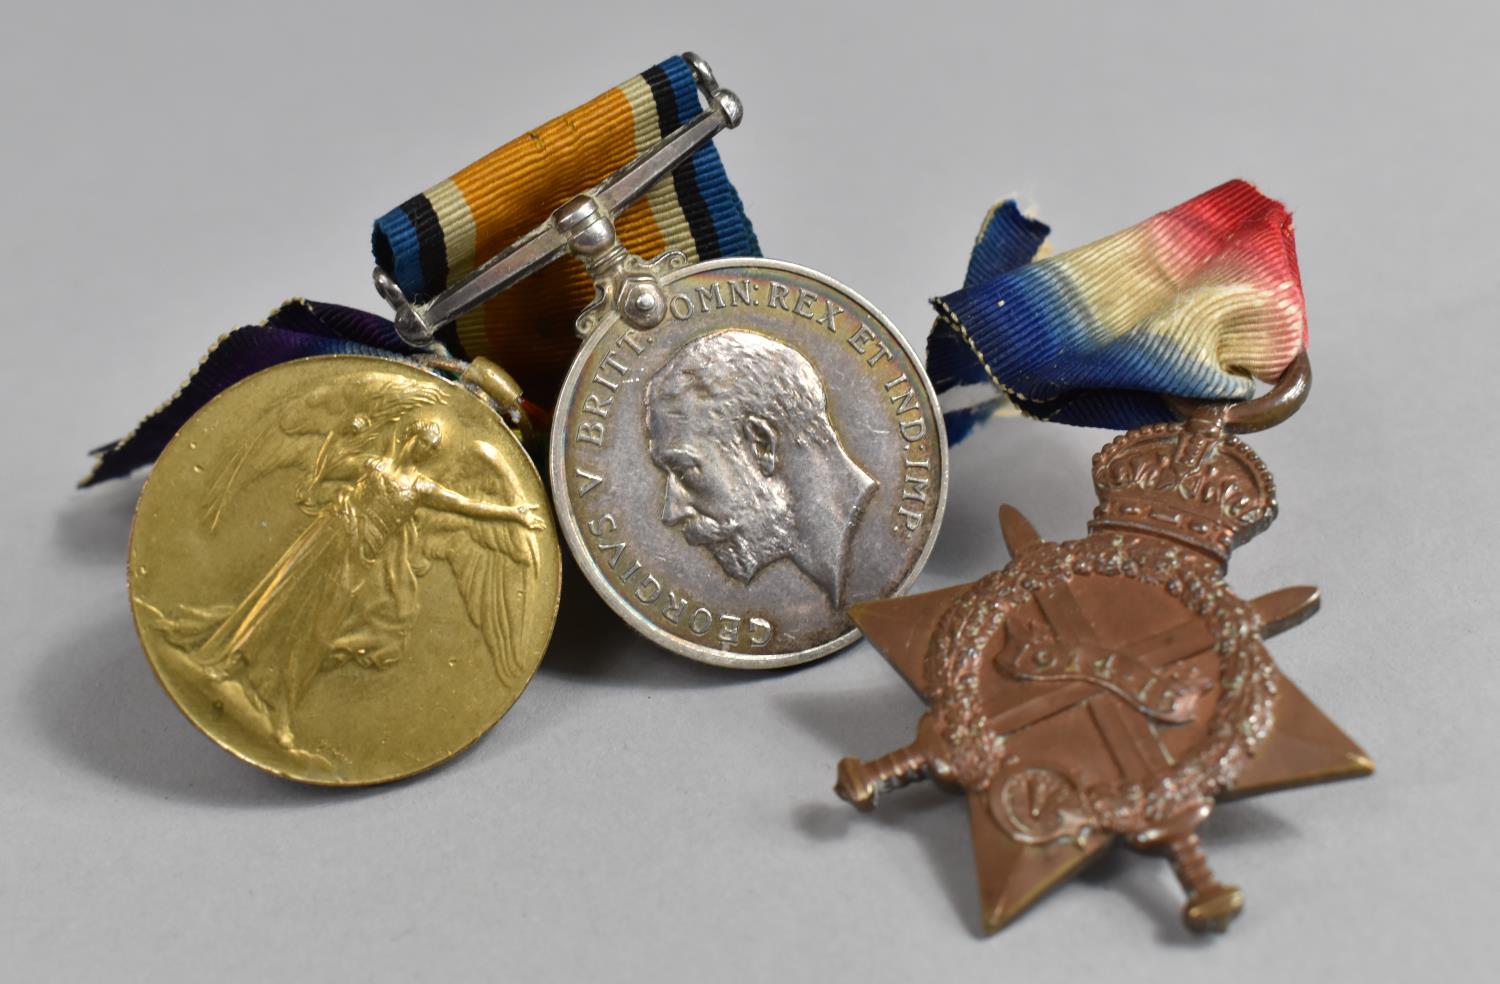 A Collection of Three WWI Medals Awarded to B Tuttle, Army Service Corps